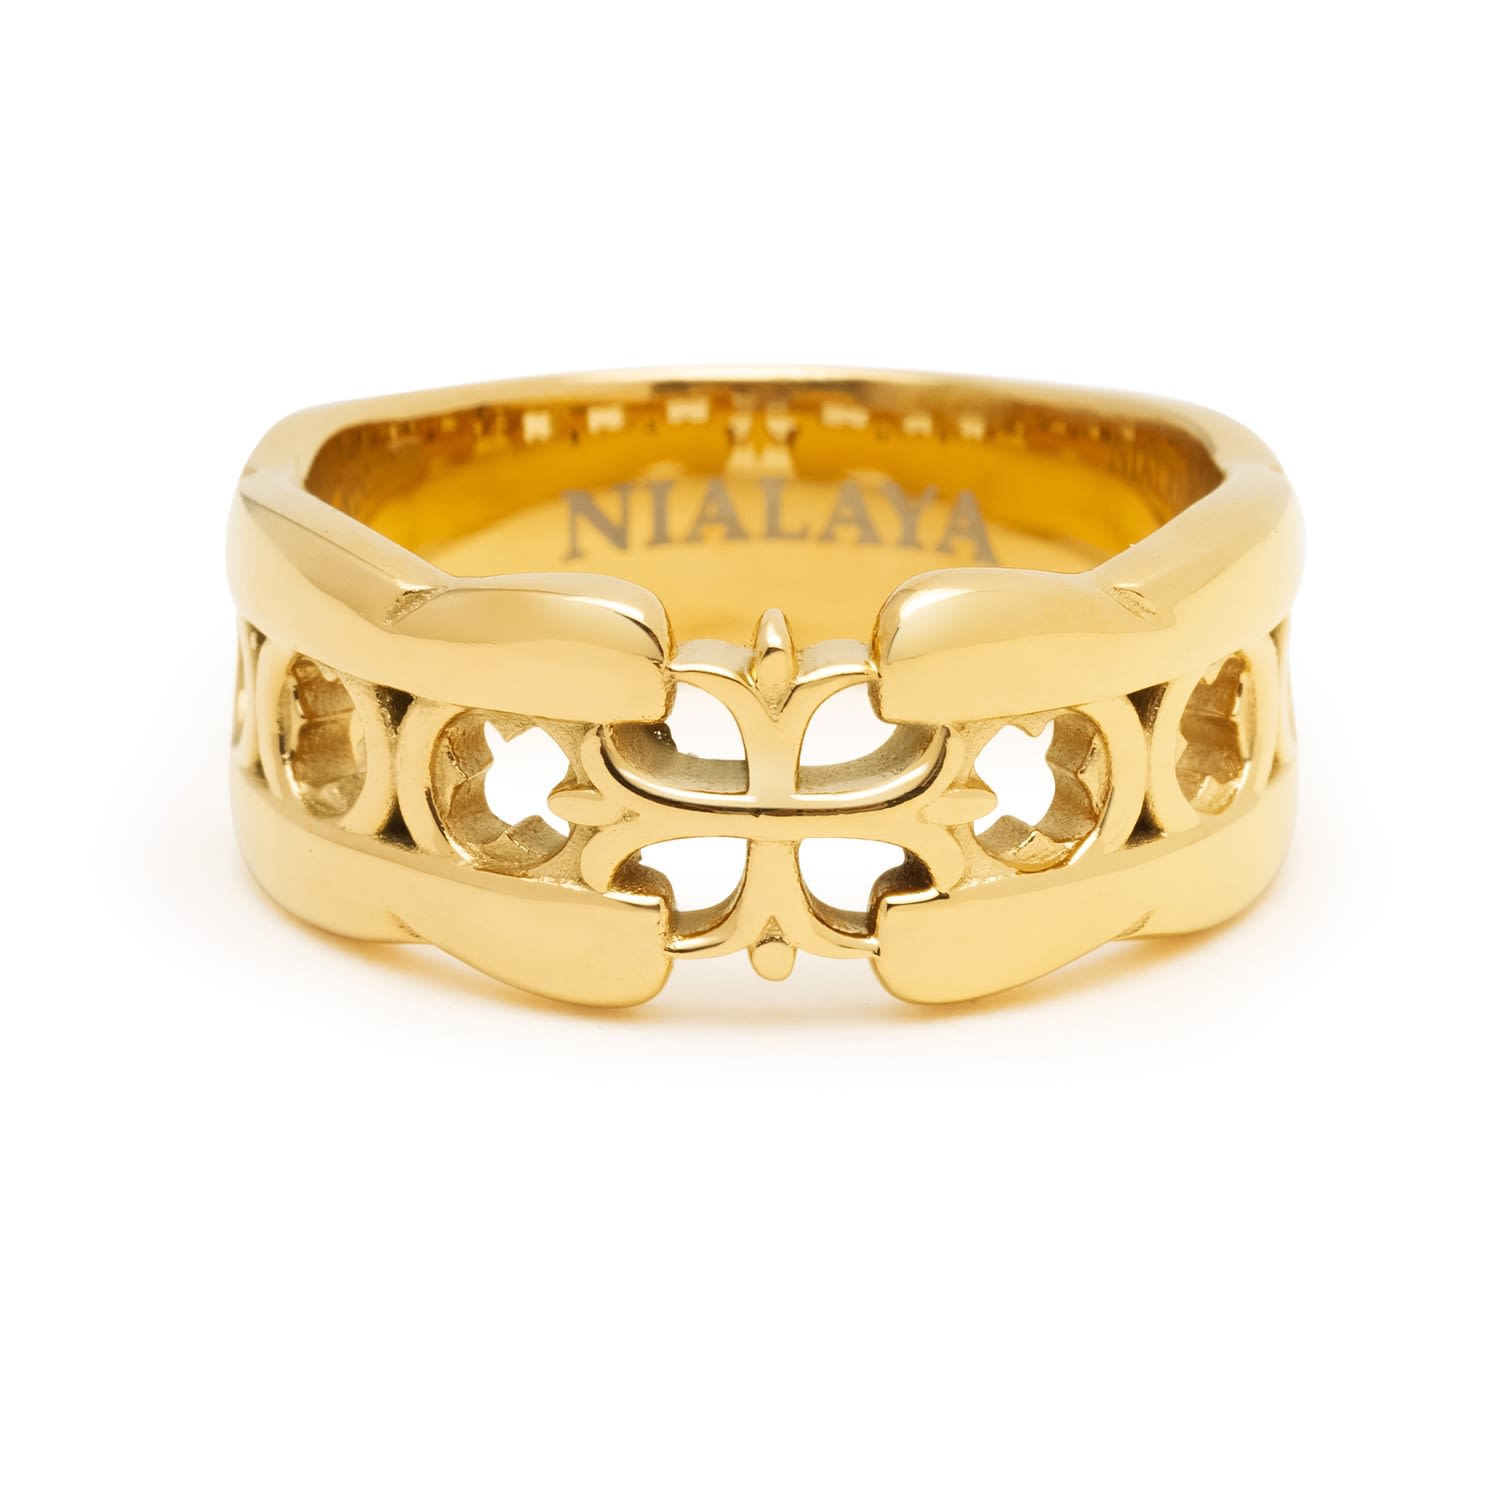 Men's Cross Band Ring With Gold Plating Nialaya Jewelry